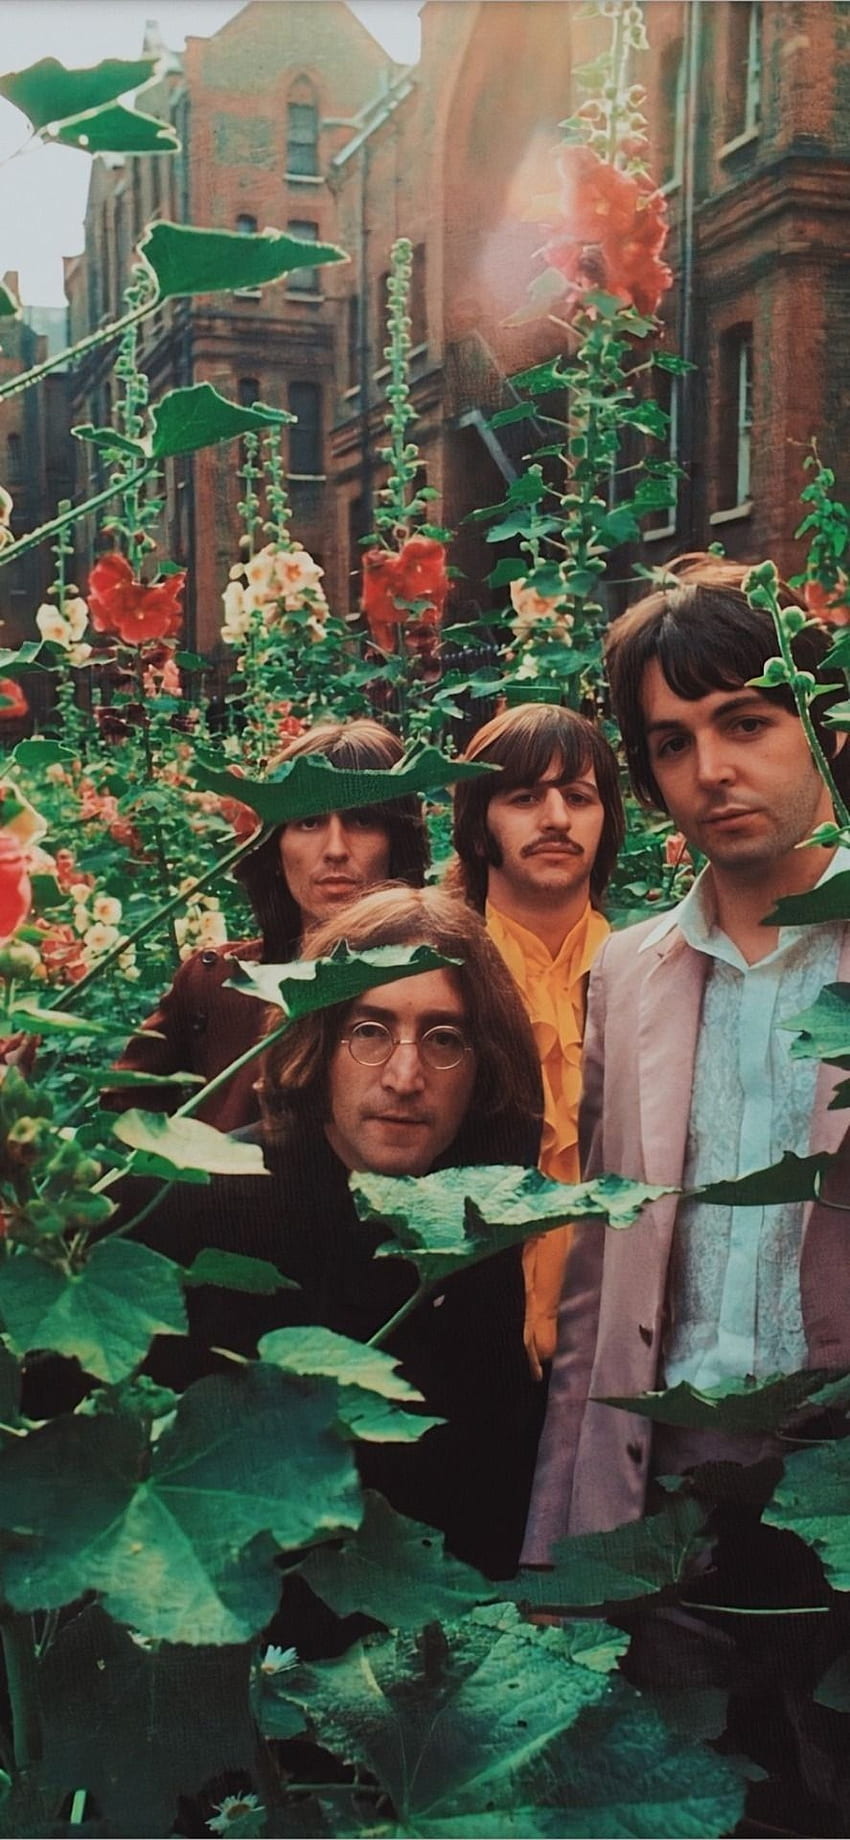 The Beatles, rock, green, music, trippy, nature, vintage, cool, retro, 60s, 70s HD phone wallpaper